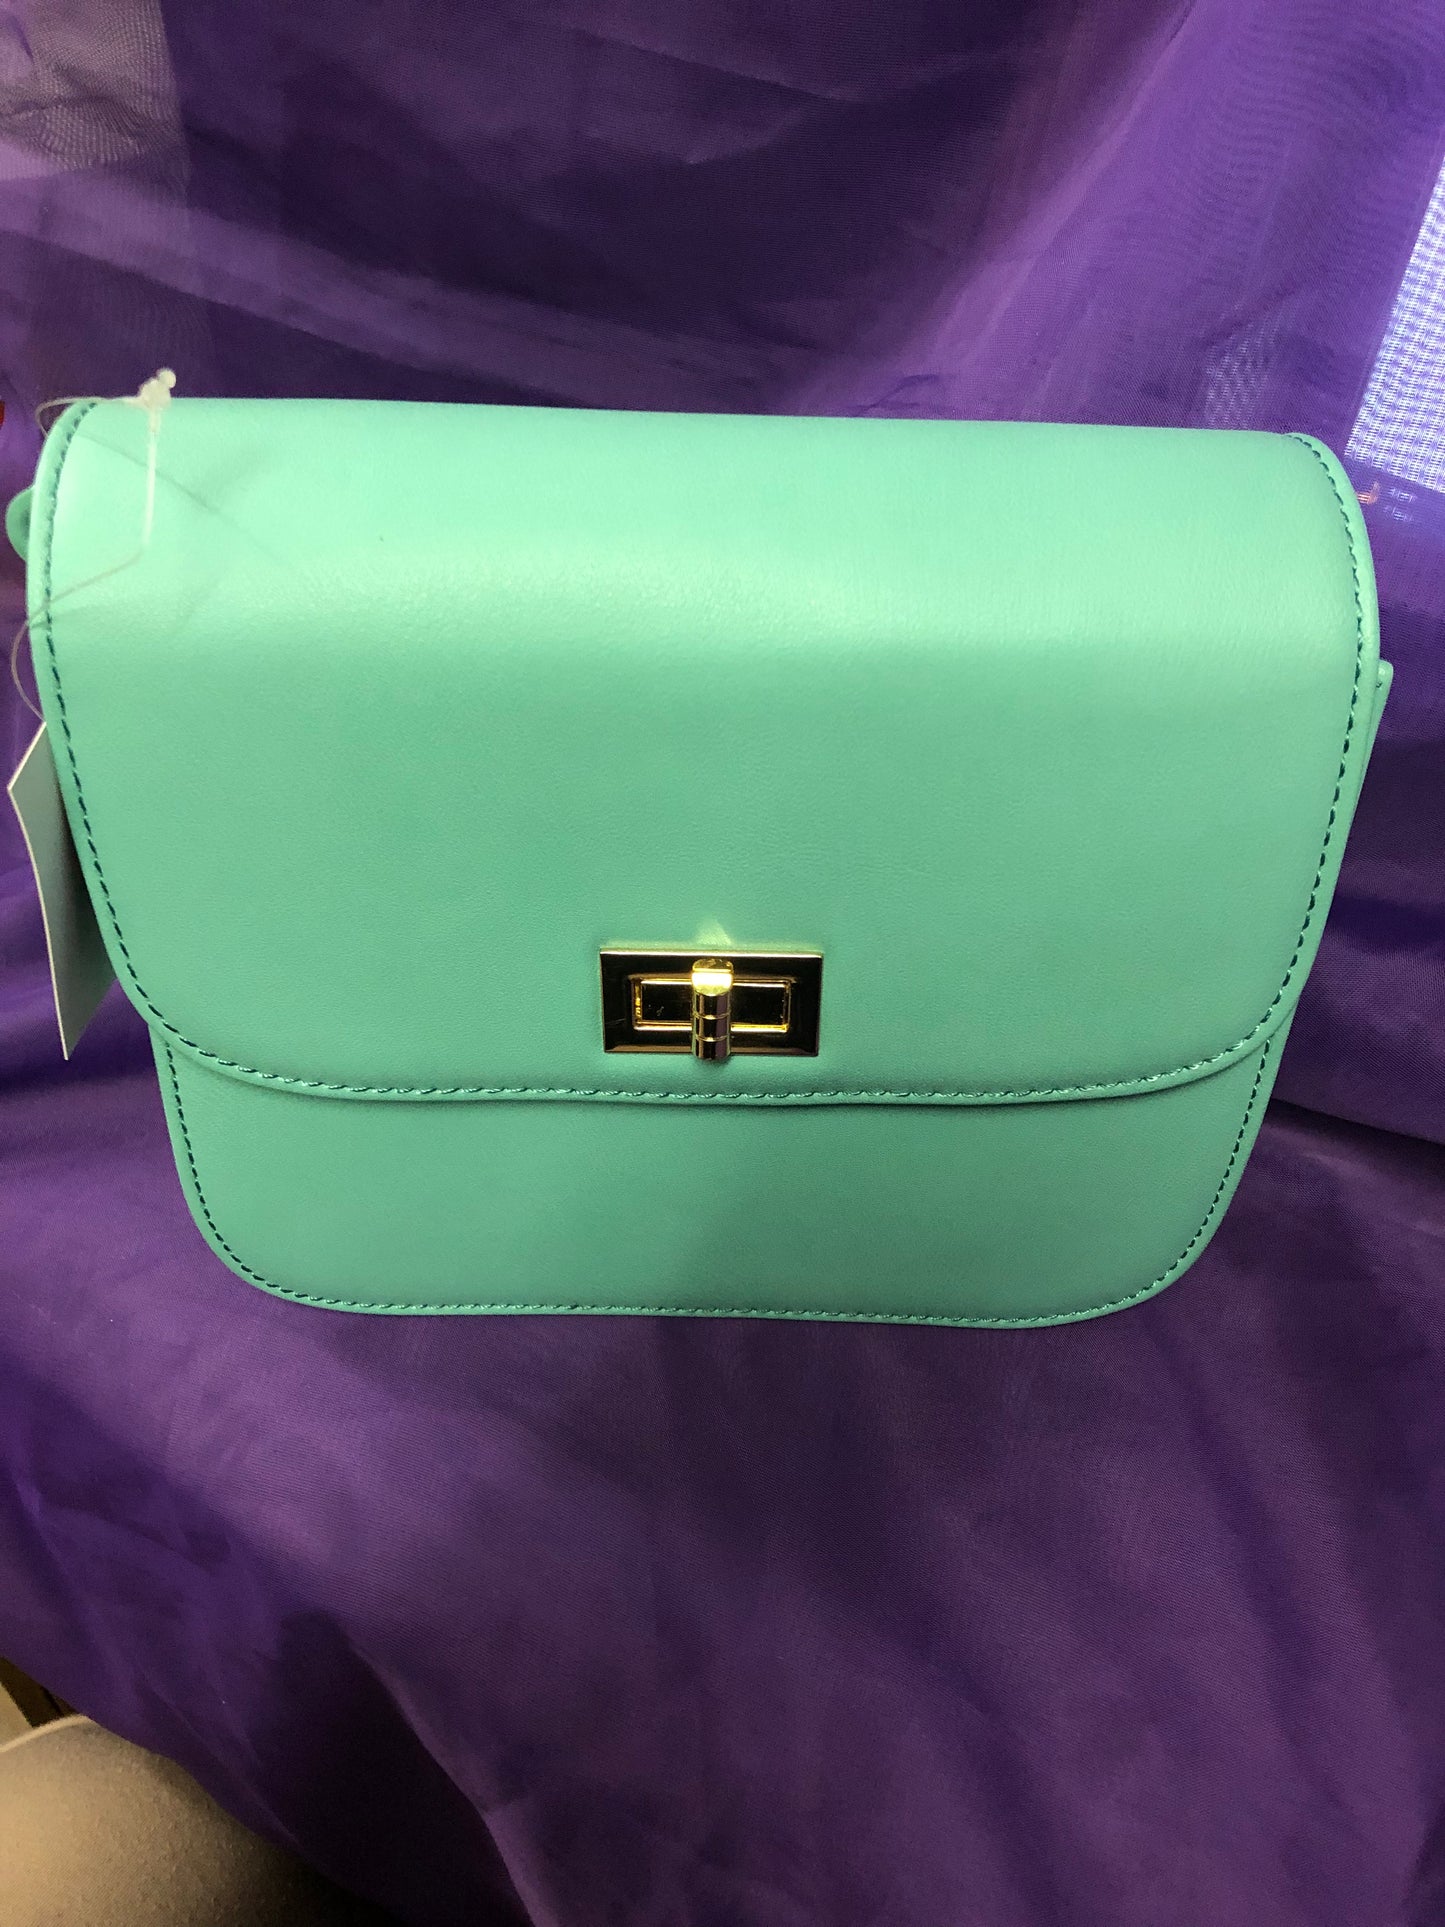 Woman Fashion Crossbody Bag Color Turquoise "New Arrival"